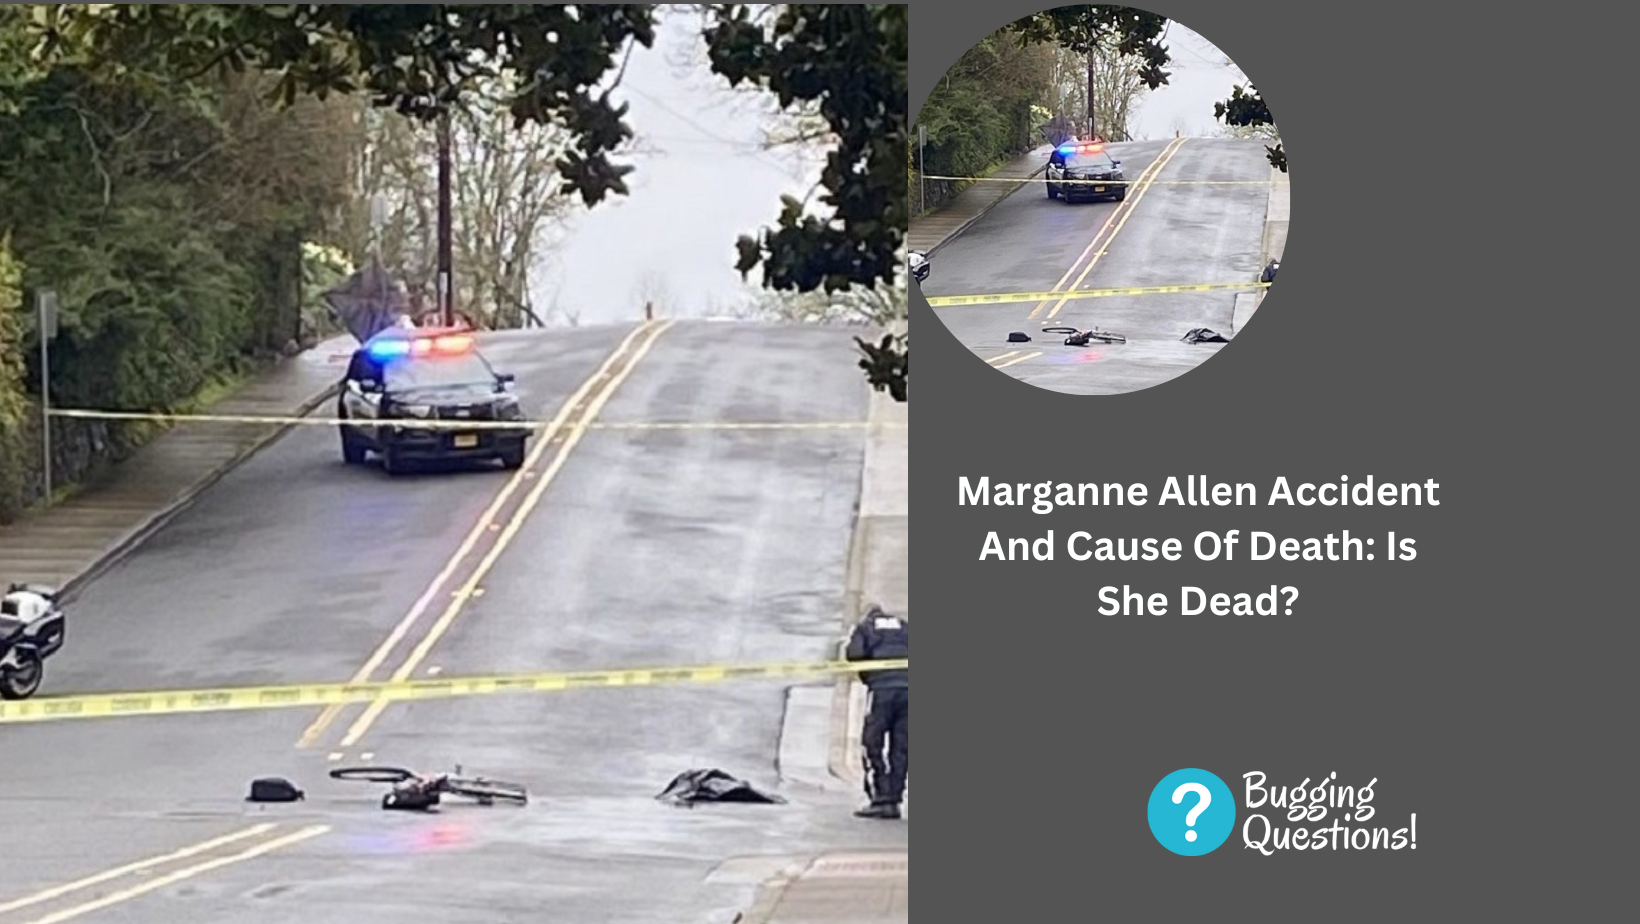 Marganne Allen Accident And Cause Of Death: Is She Dead?